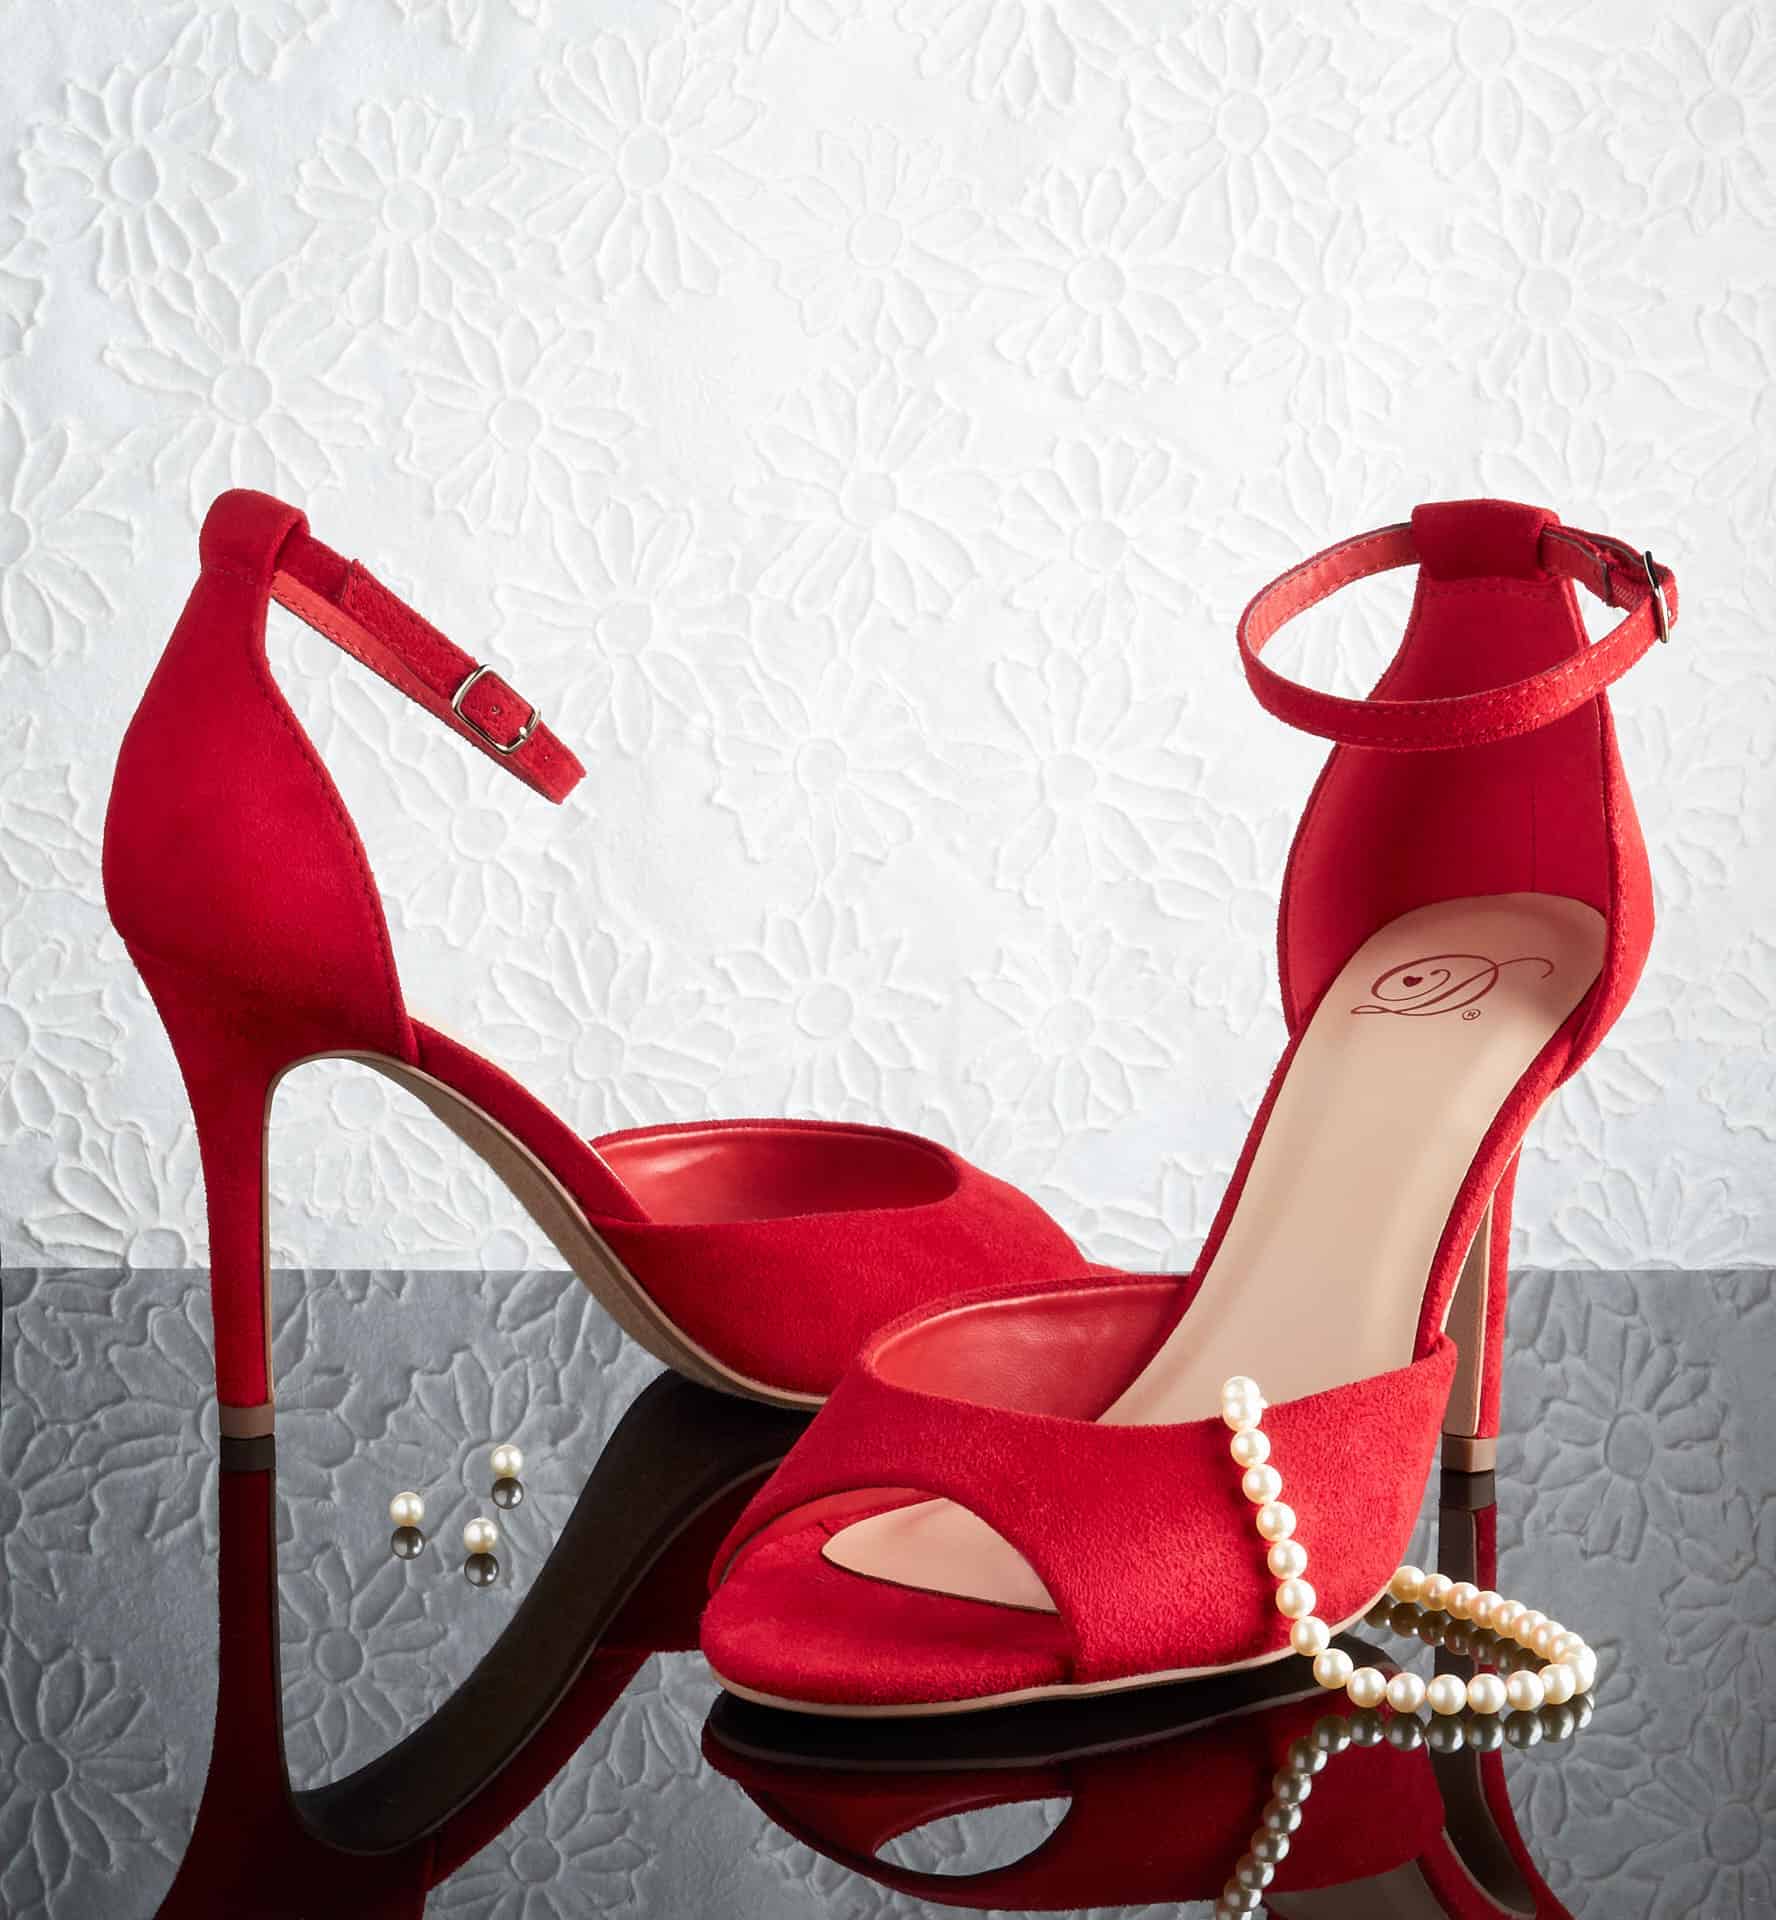 Pair of red heels with pearls